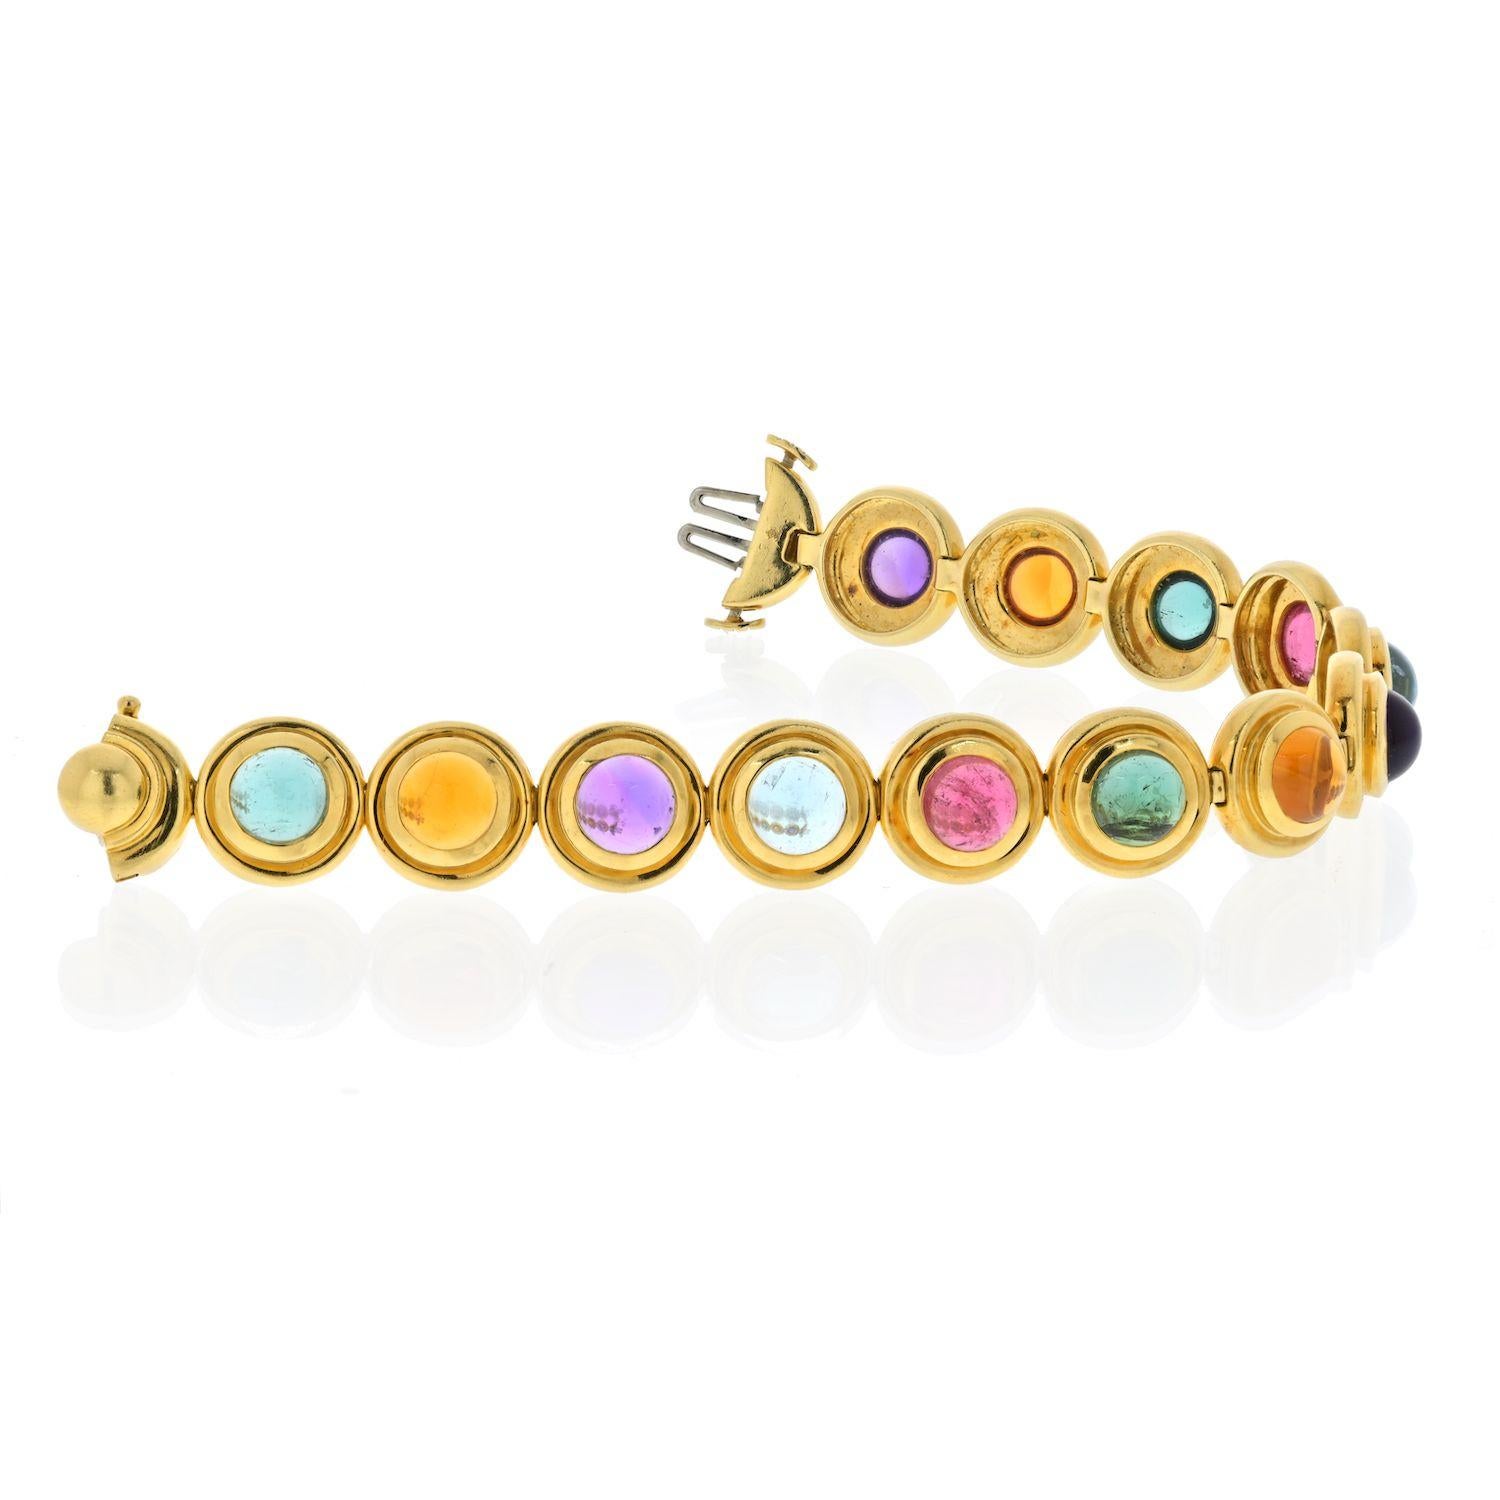 18k yellow gold bracelet, crafted by Paloma Picasso for Tiffany & Co, featuring multicolor gemstone cabochons: aquamarine, green and pink tourmaline, amethyst, citrine, peridot. Bracelet is 7